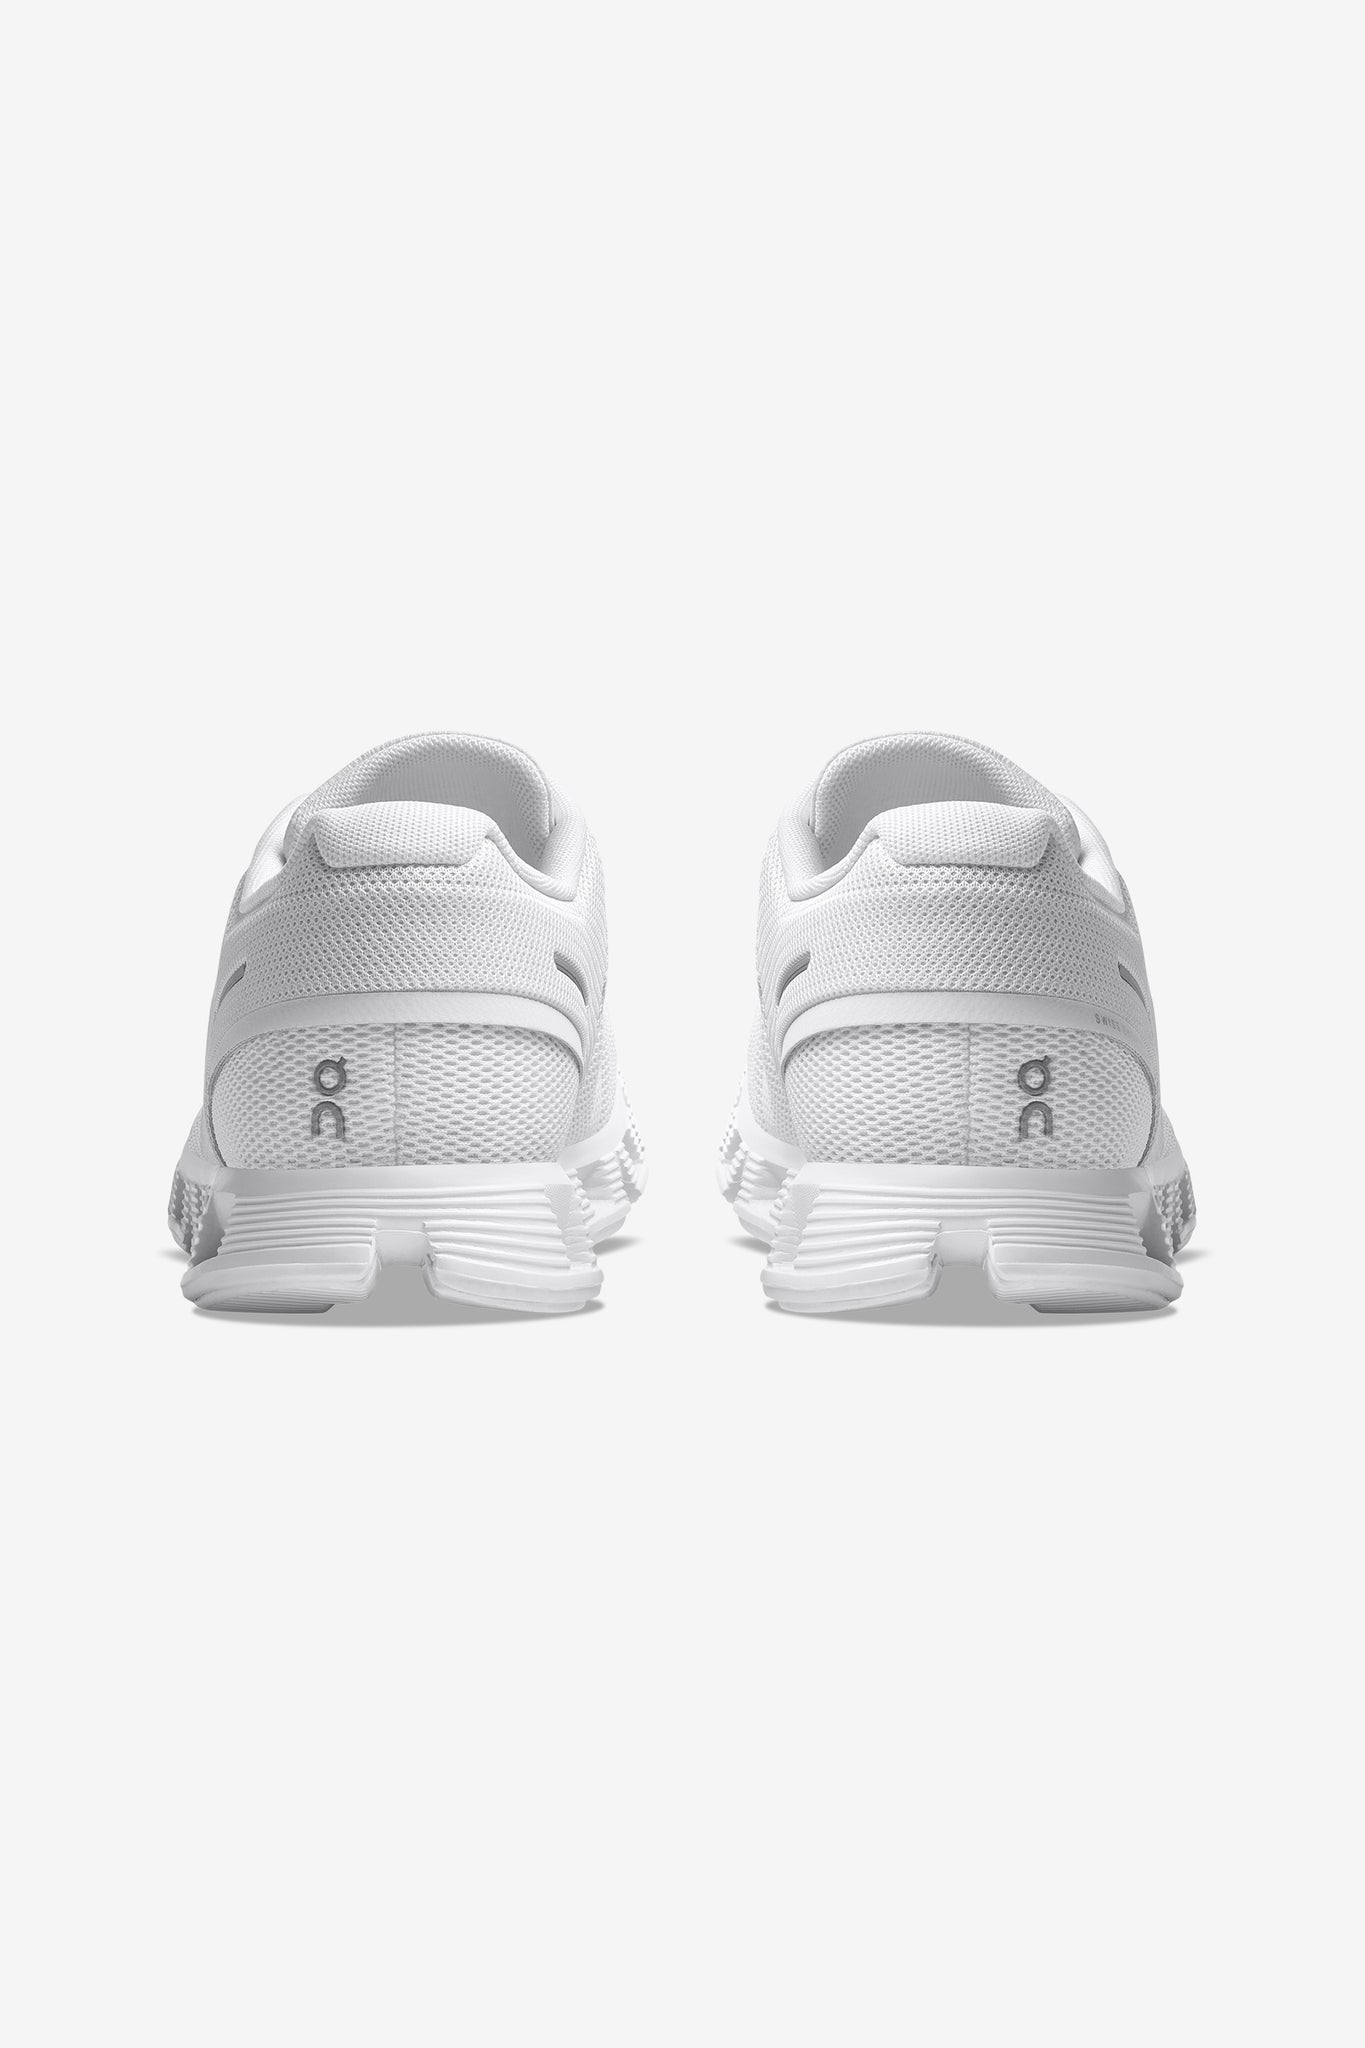 ON | Men's Cloud 5 in All White